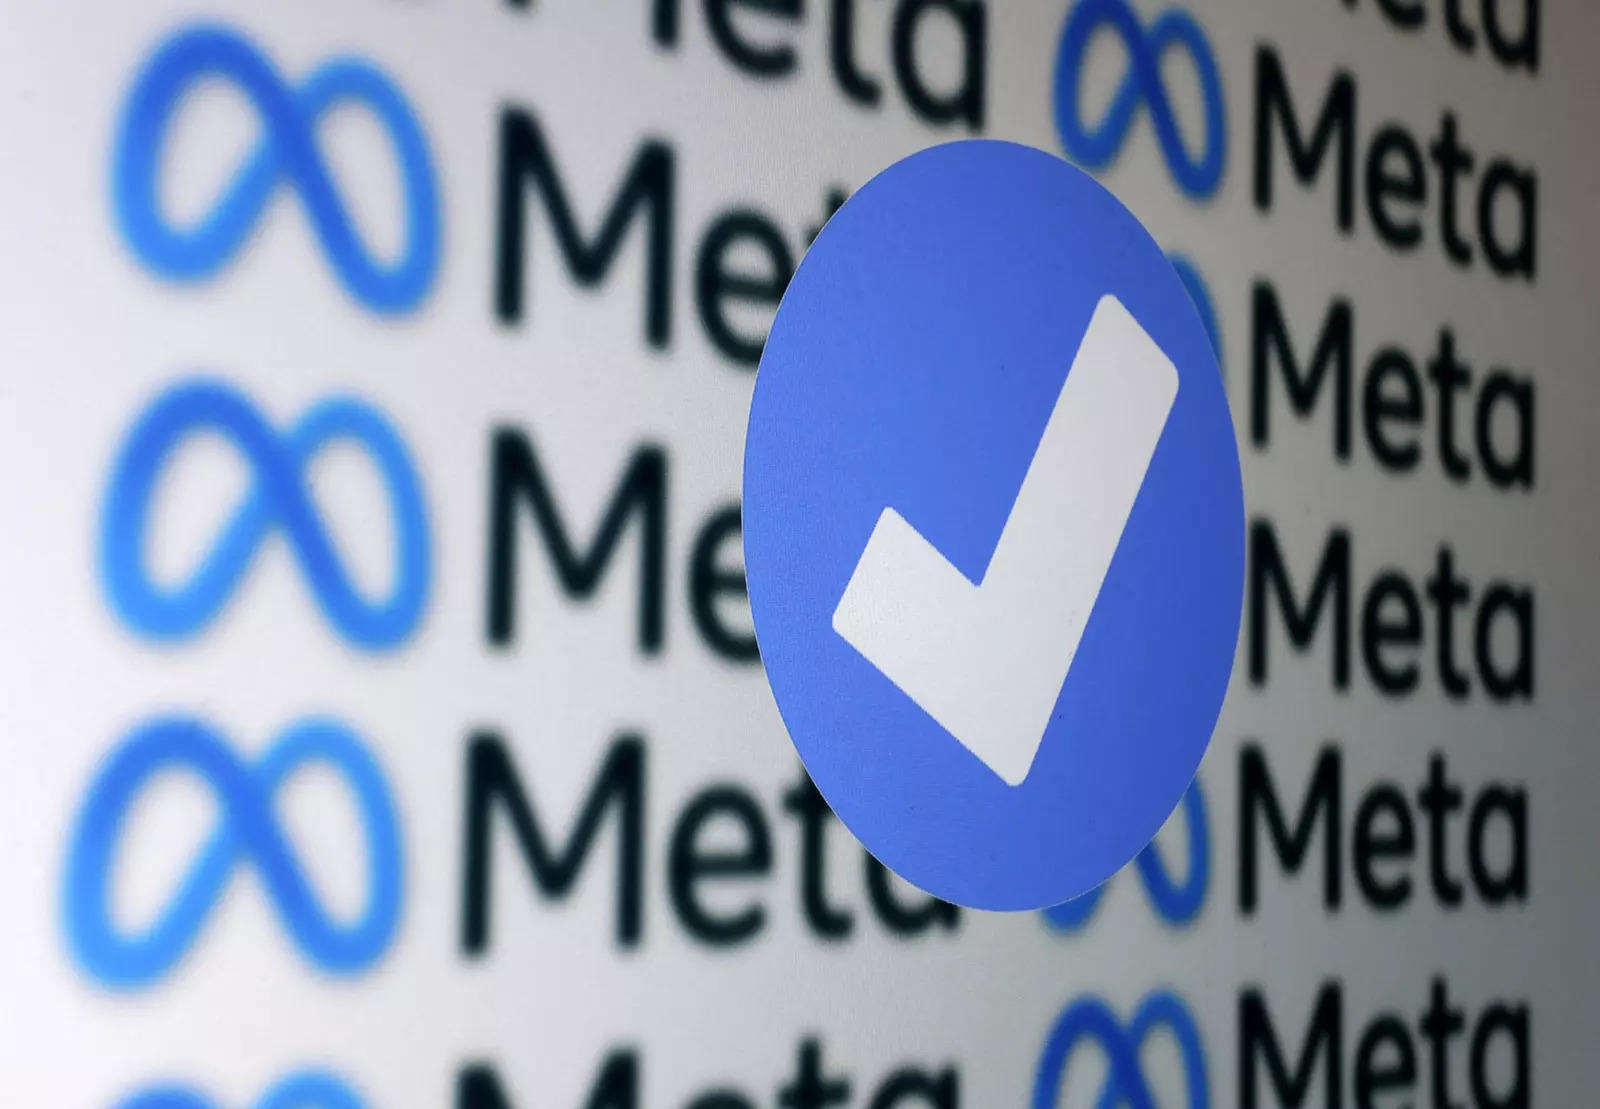 Meta Verified Check price, features, eligibility, other details